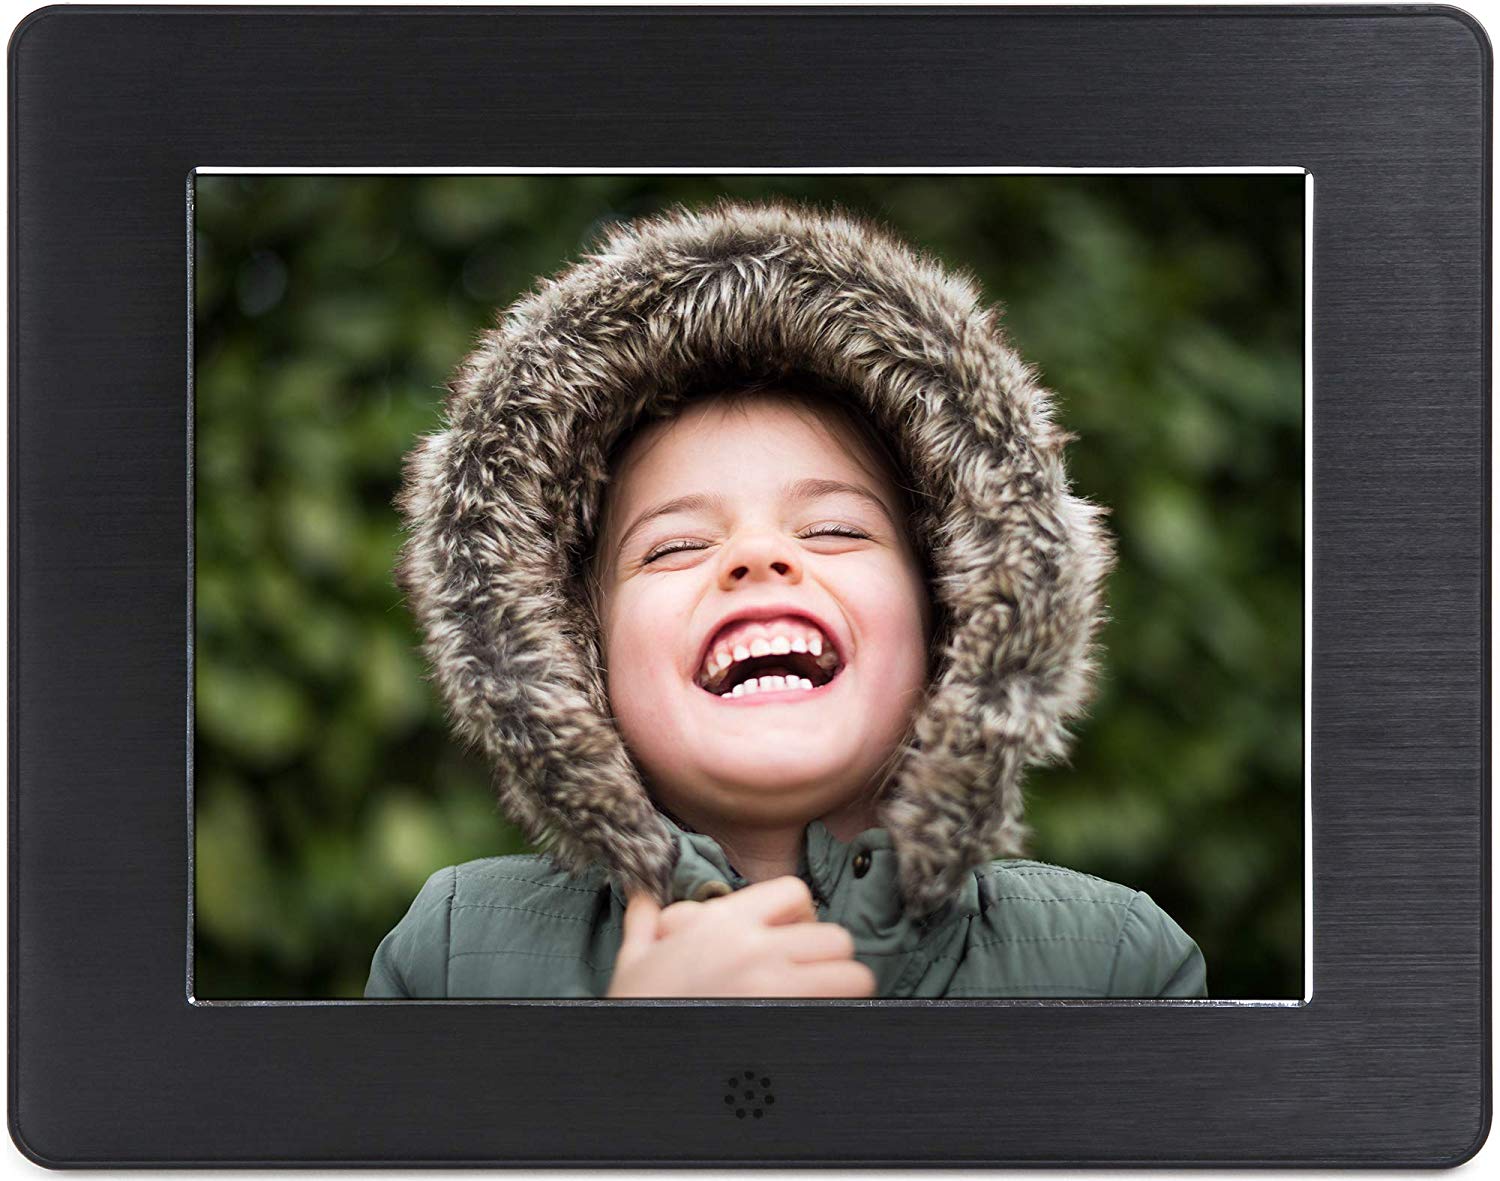 Micca 8-Inch Digital Photo Frame High Resolution LCD, MP3 Music 1080P HD Video Playback, Auto On/Off Timer (Model: N8, Replaces M808z) 2